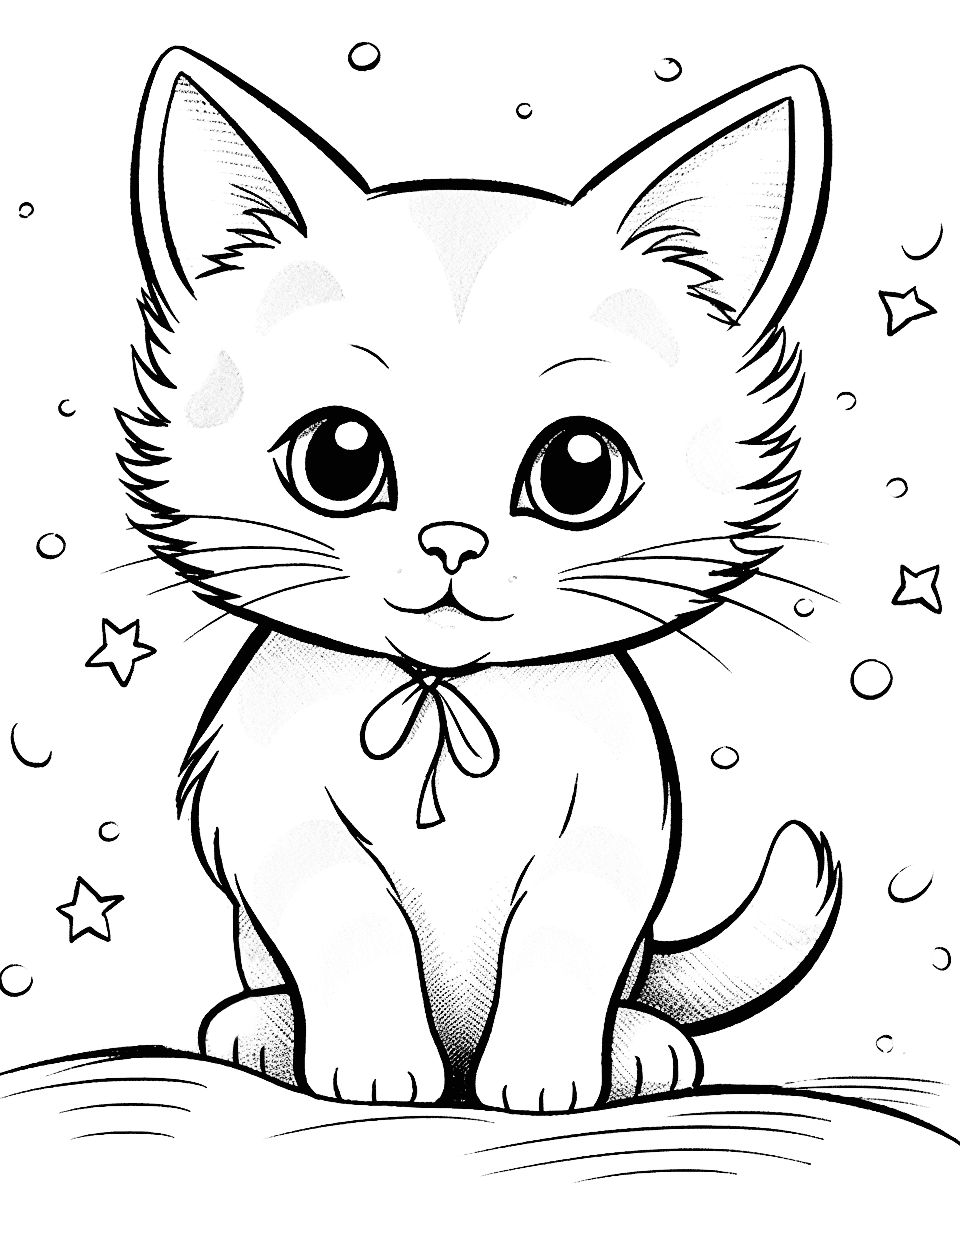 Kitten’s First Snow Cat Coloring Page - A wide-eyed kitten experiencing its first snowfall, with a snowy background.